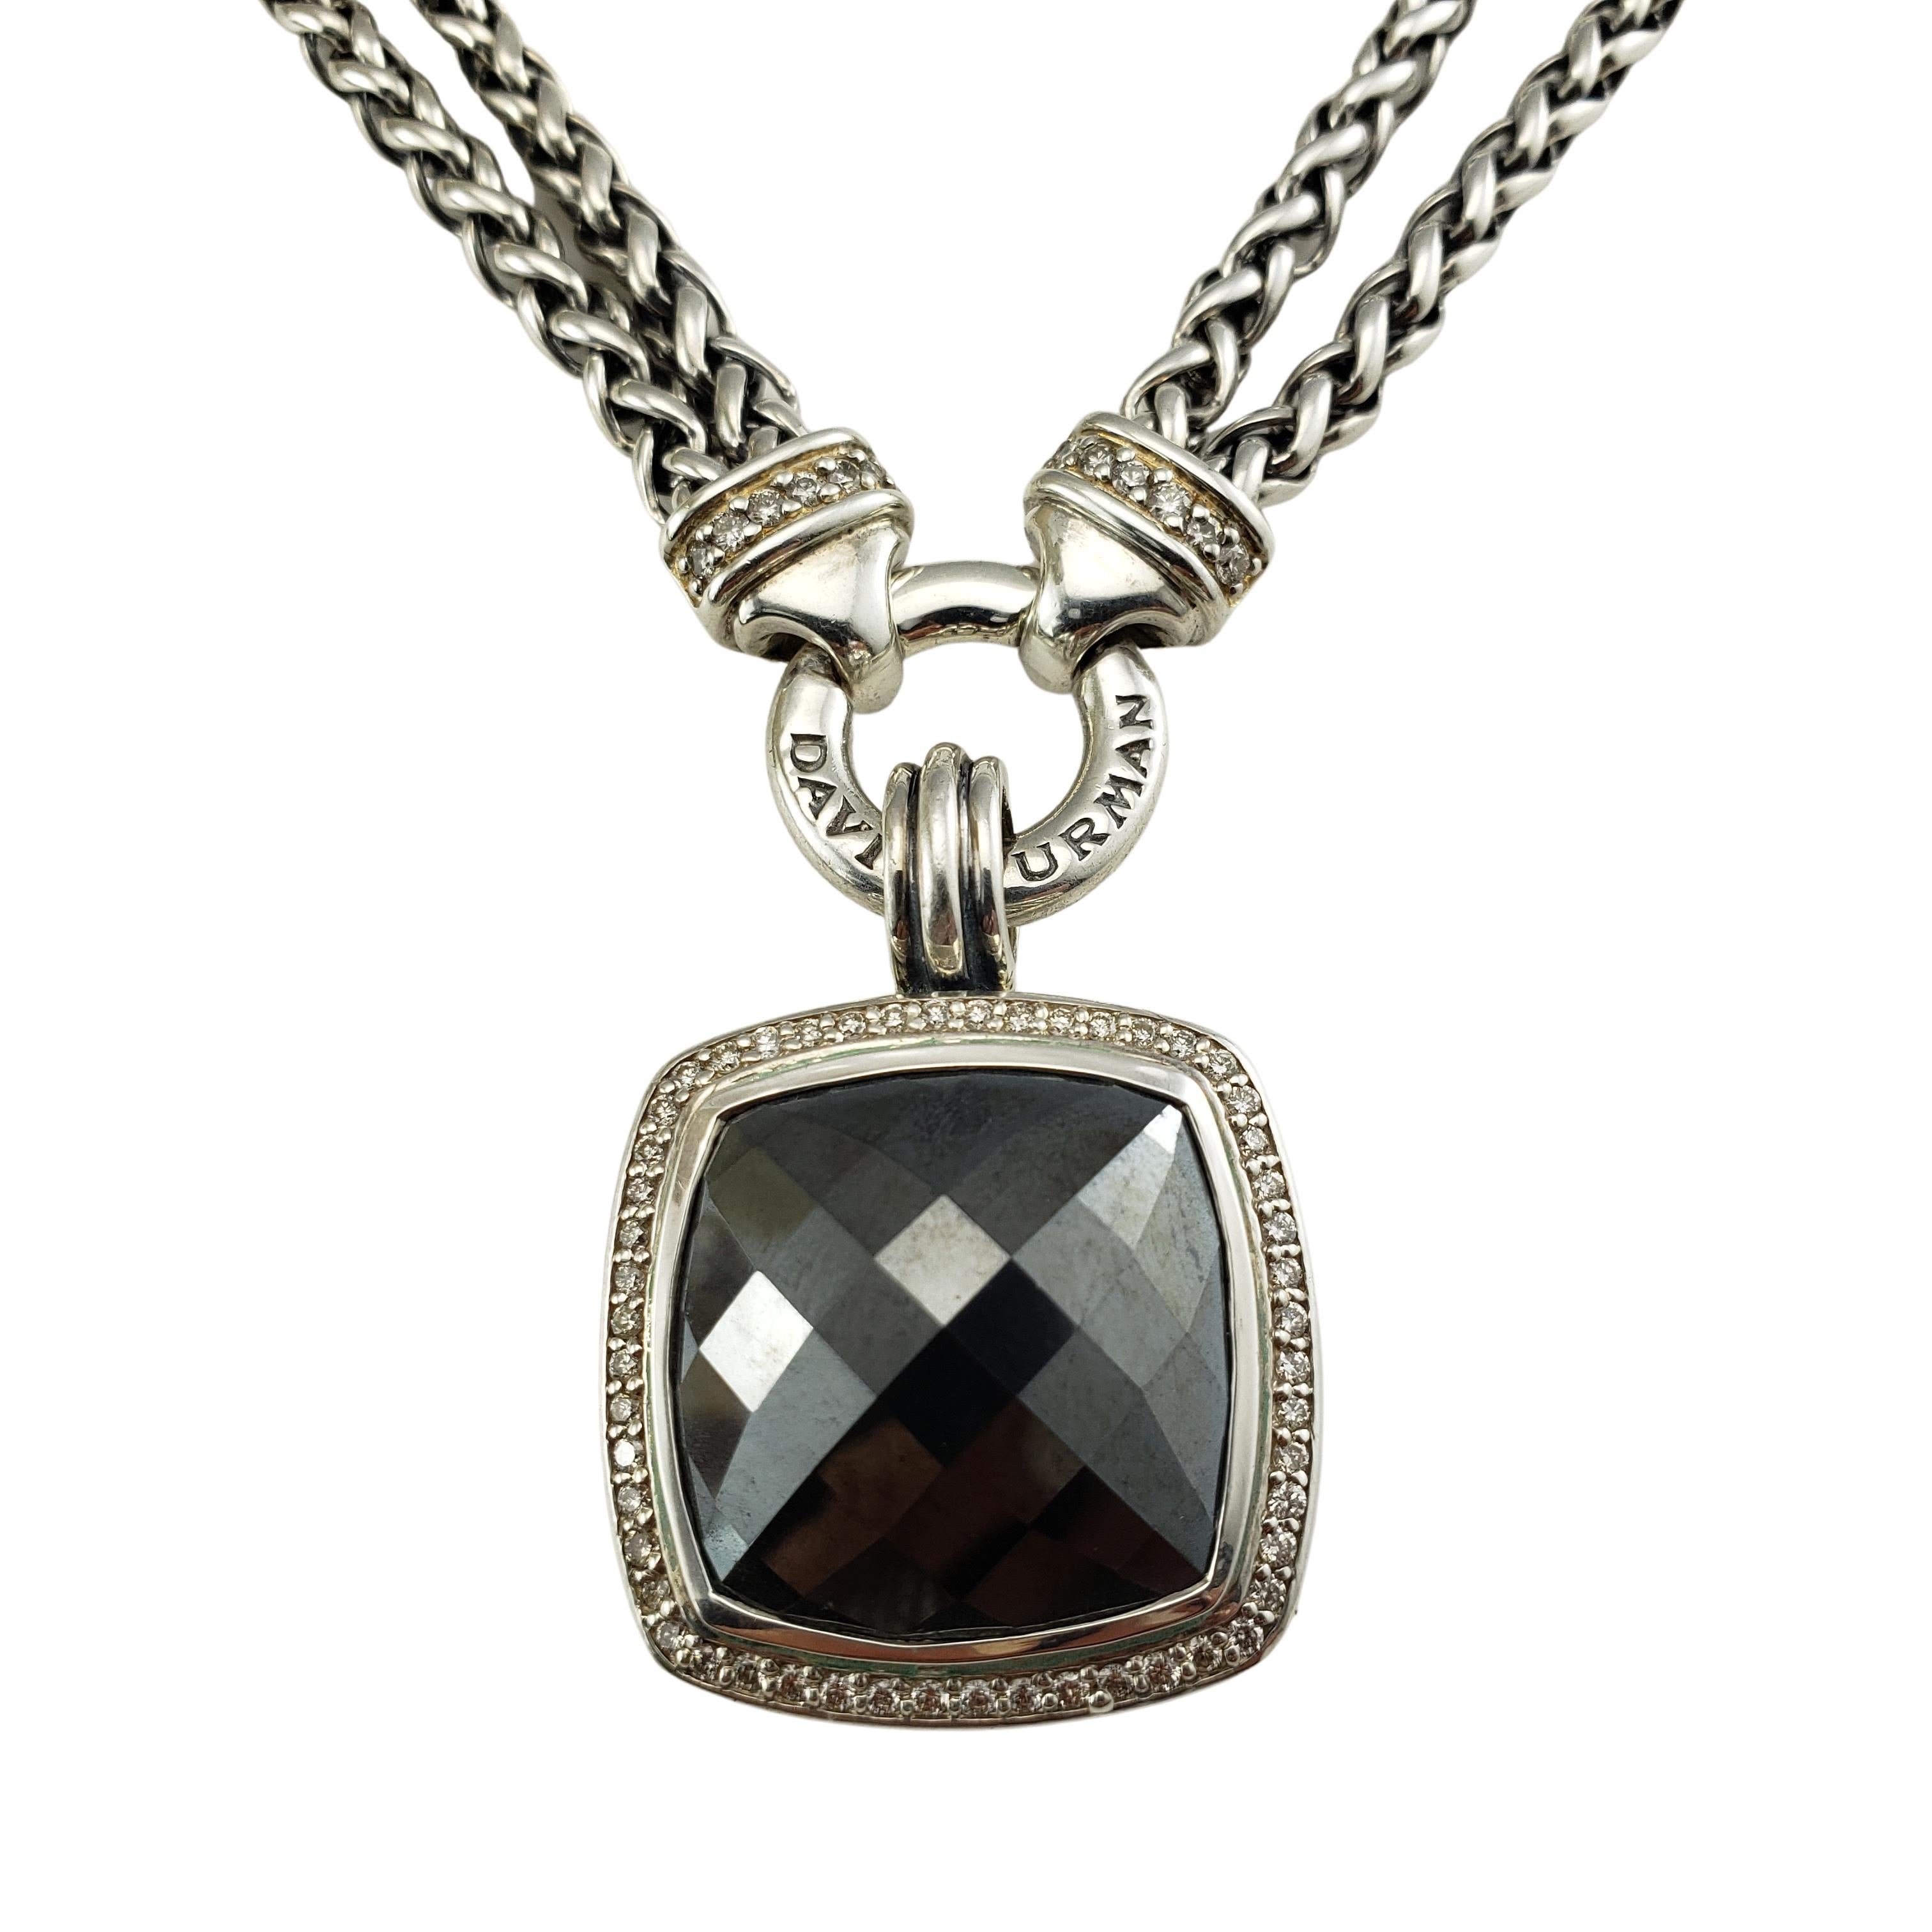 Vintage David Yurman Albion Sterling Silver Hematite and Diamond Pendant Necklace-

This stunning sterling silver piece features one faceted hematite gemstone (21 mm x 21 mm) surrounded by 52 round brilliant cut diamonds and suspended from a double